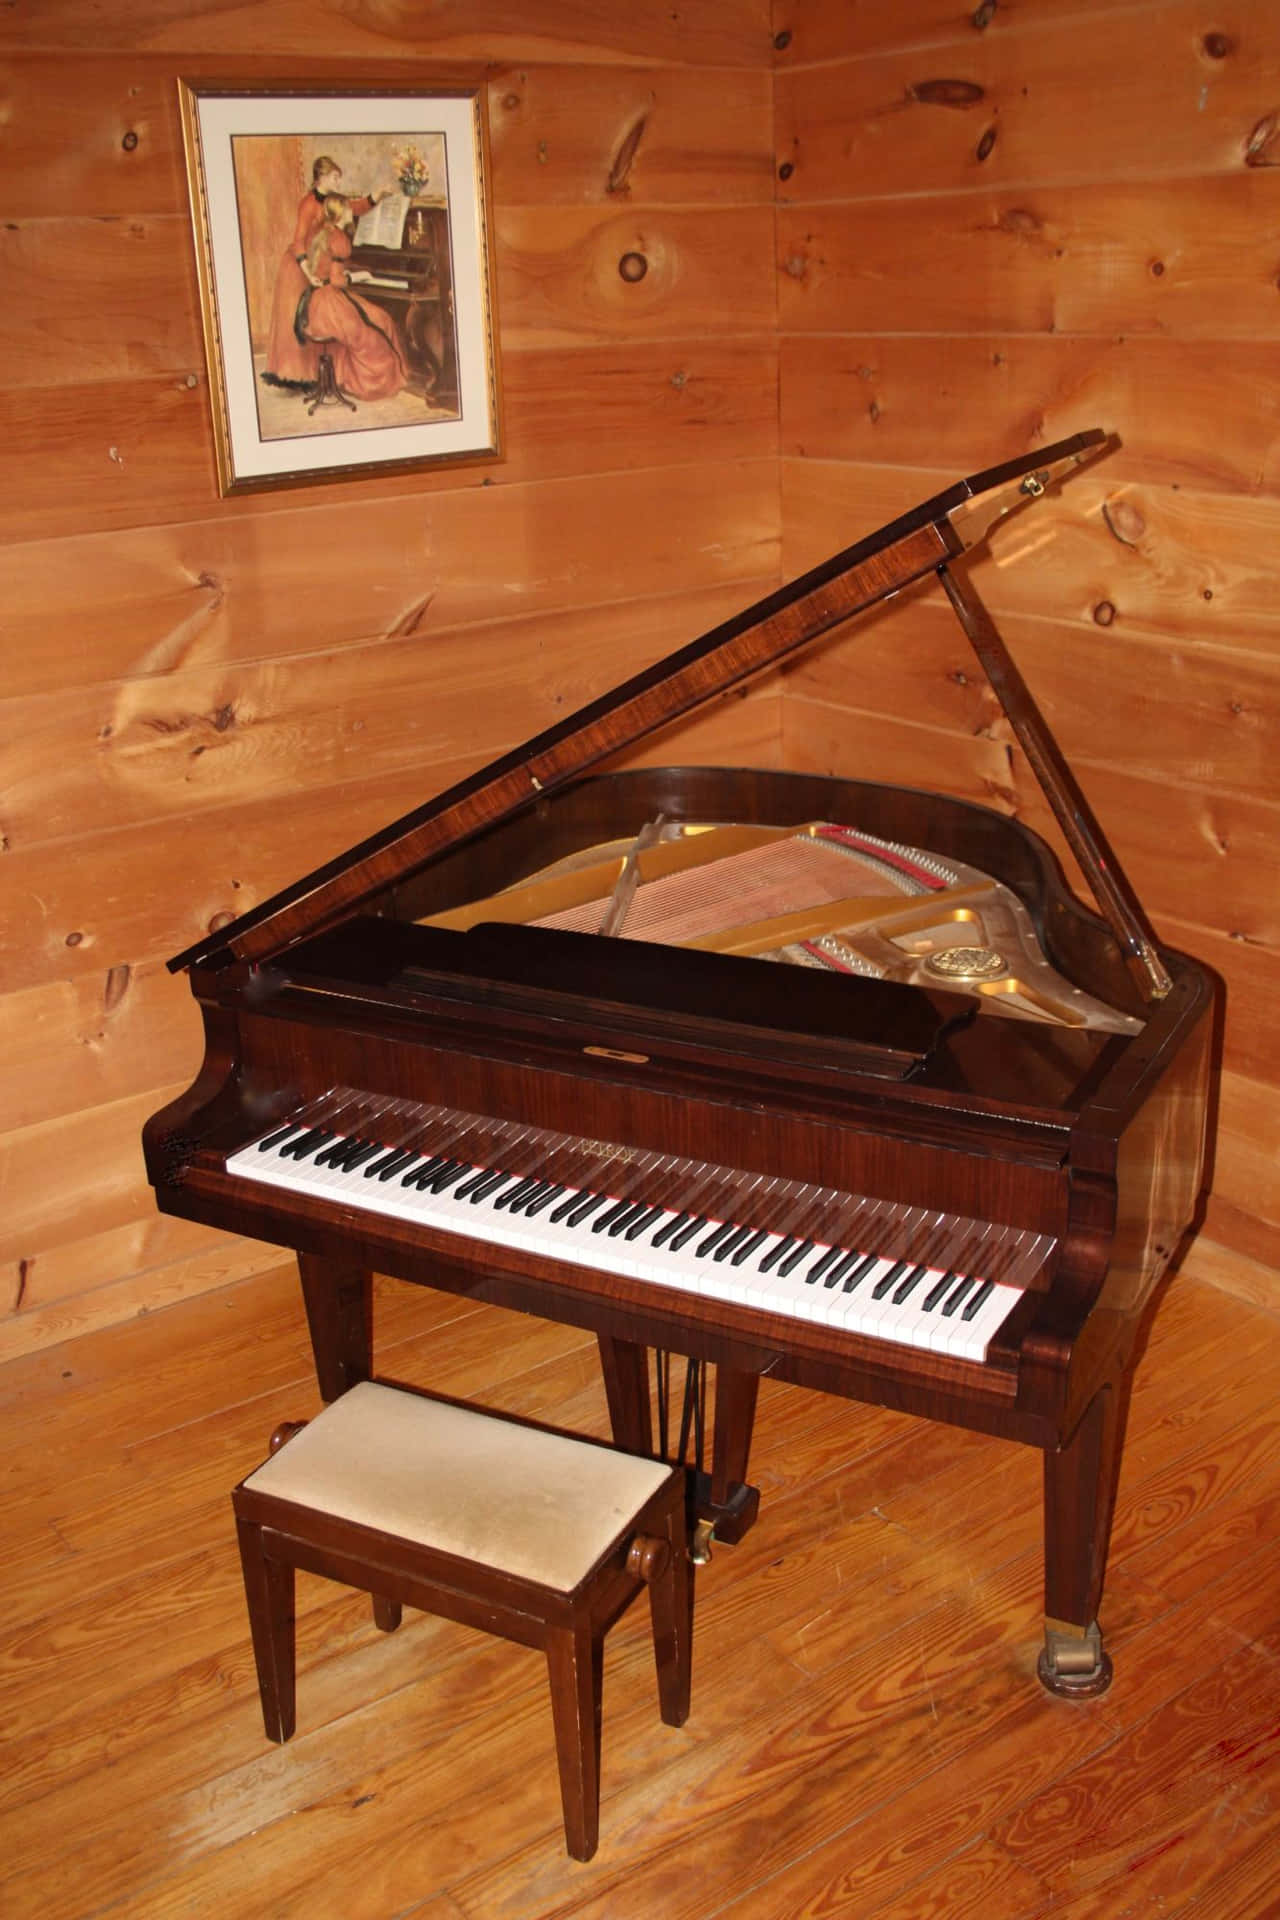 A beautiful grand piano in the home of a skilled player.